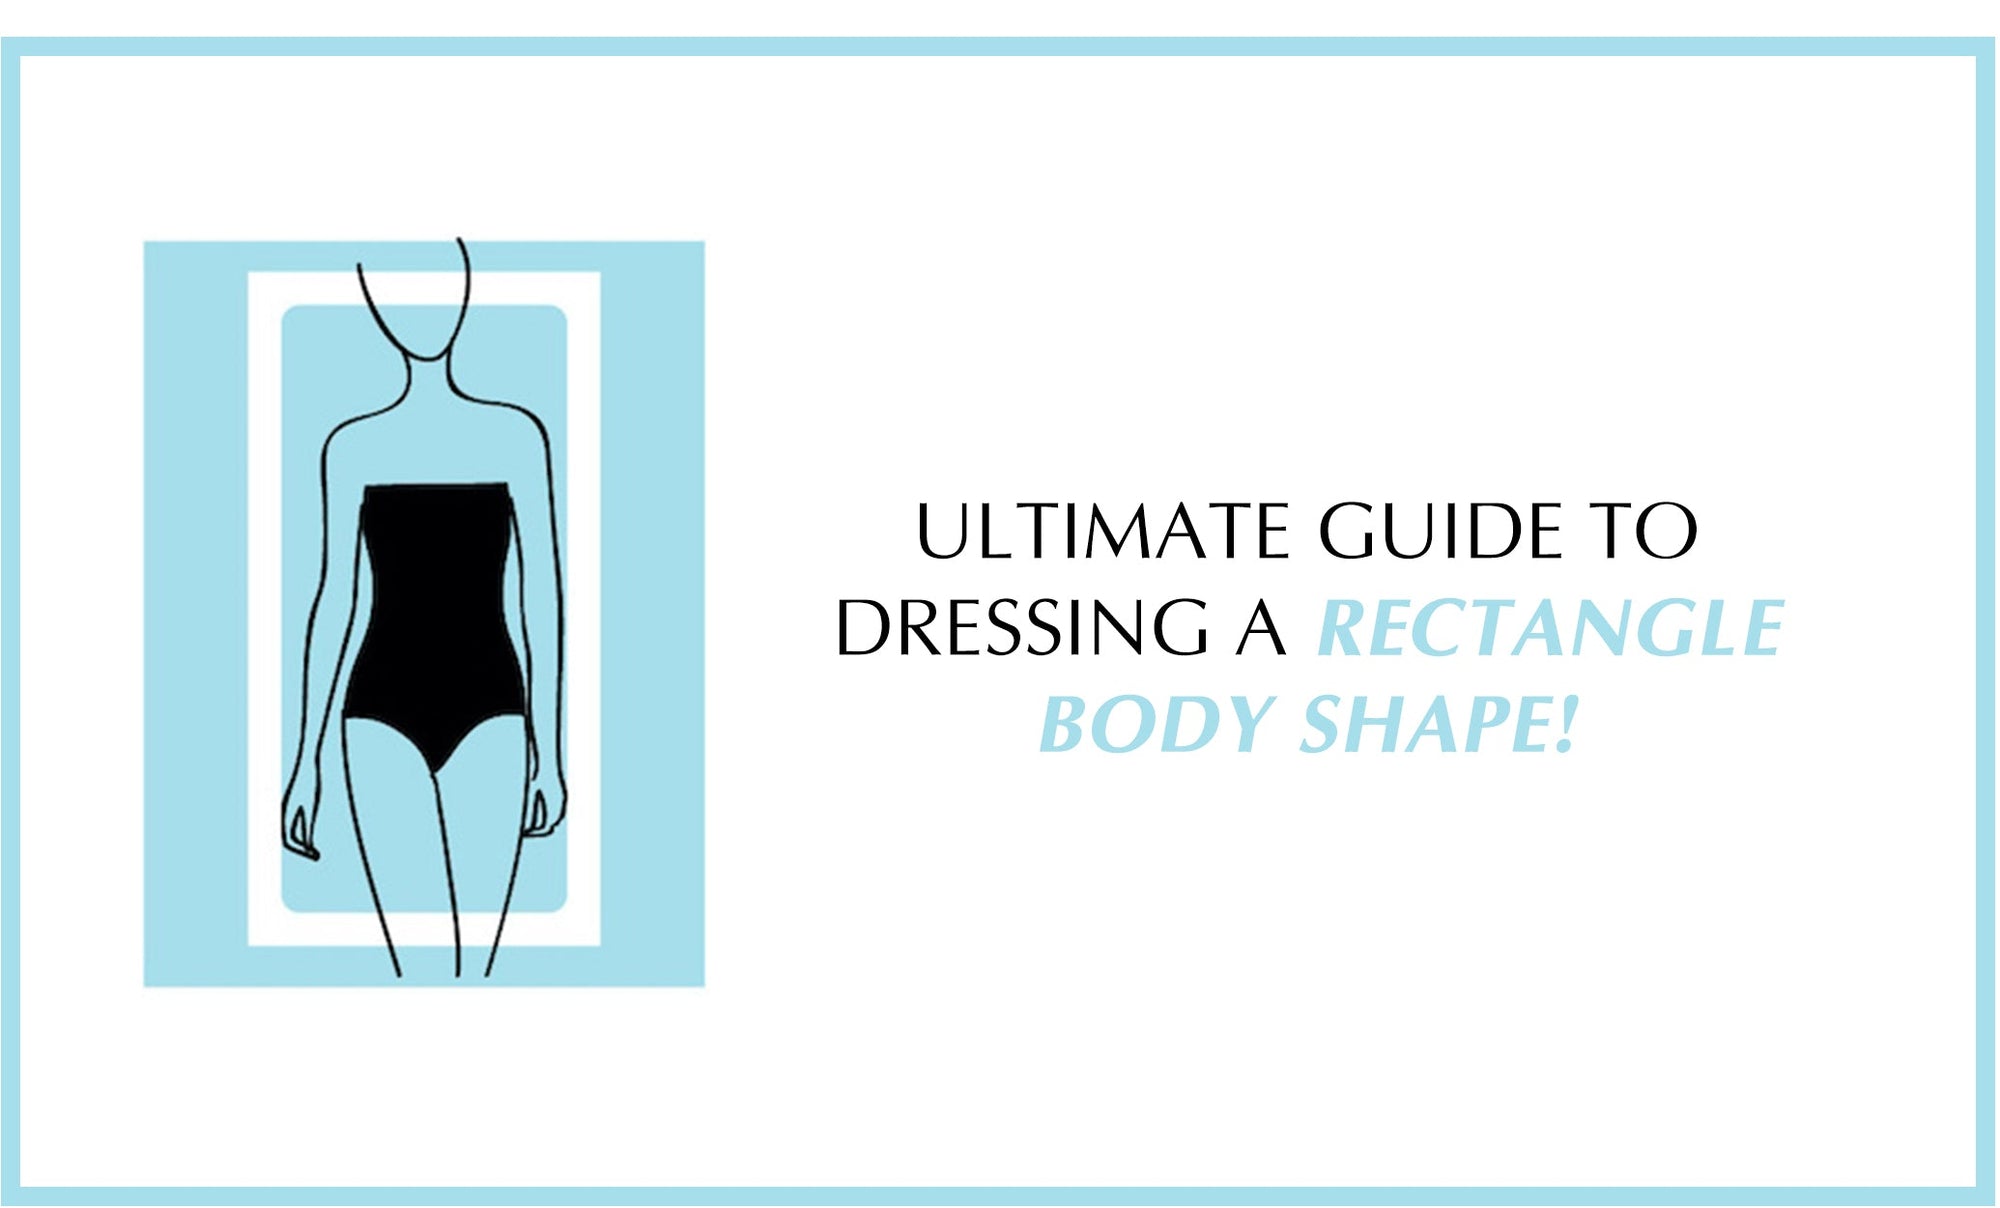 Ultimate guide to dressing a rectangle body shape! - Shop Mulmul